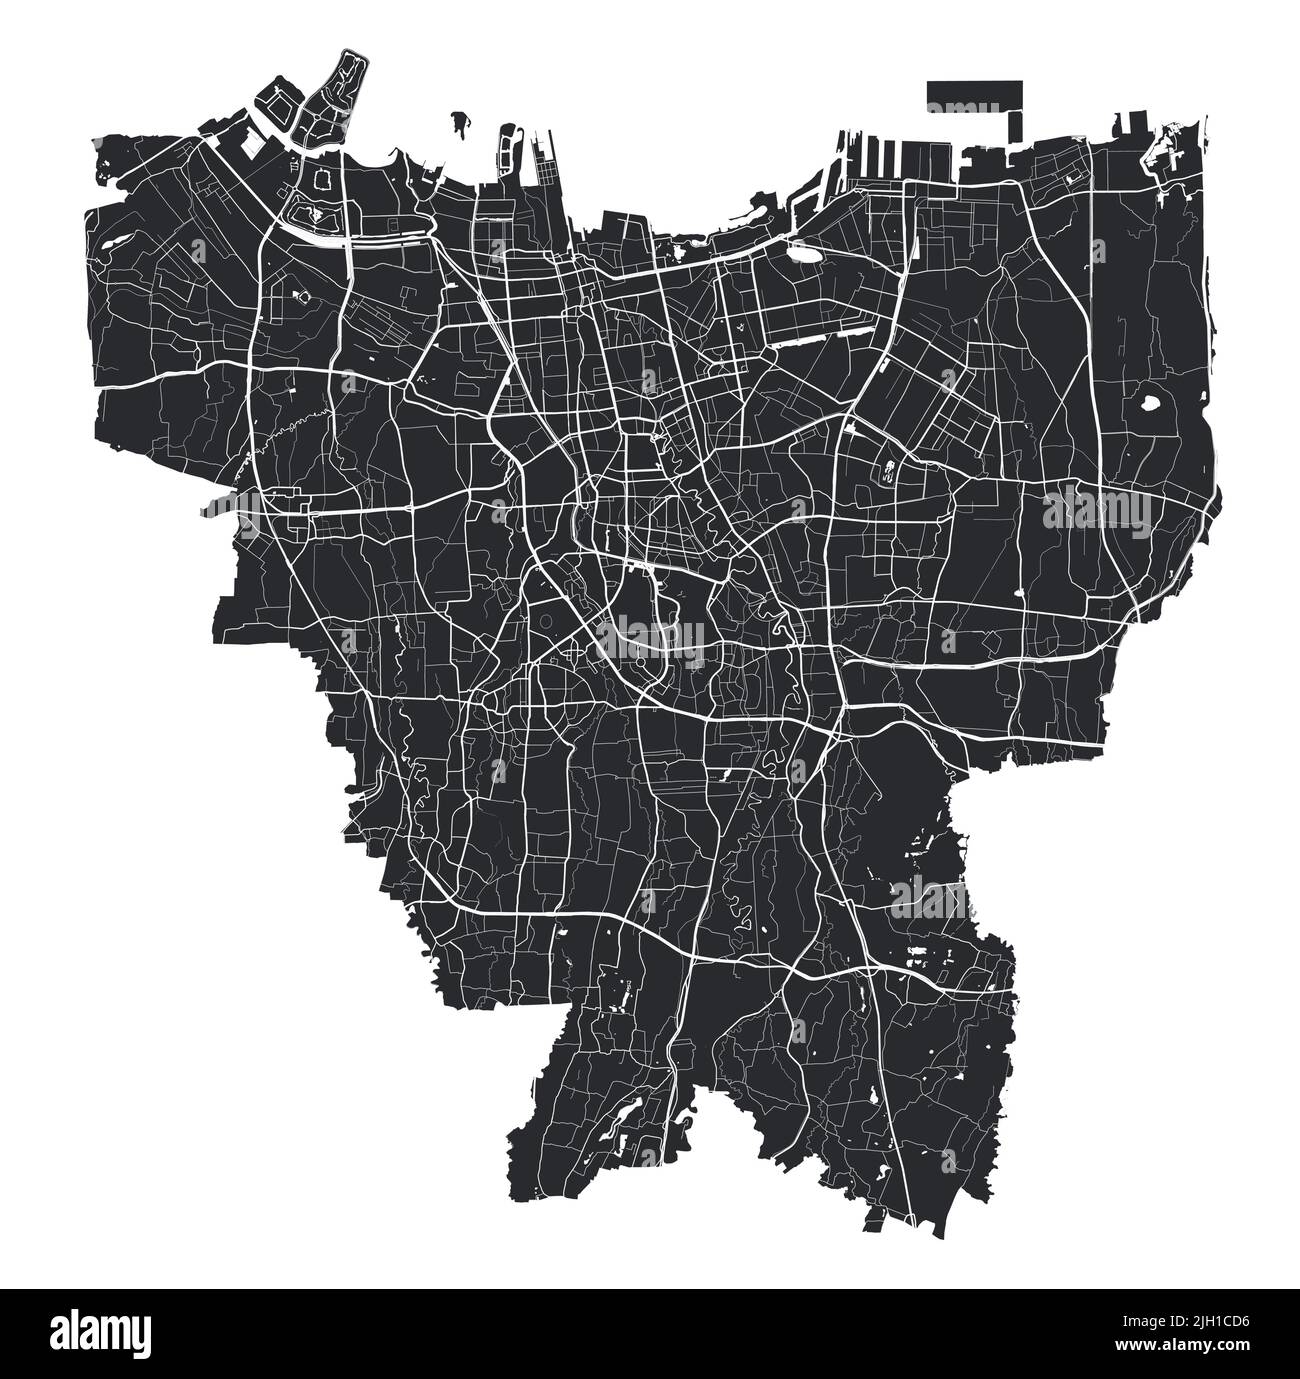 Jakarta vector map. Detailed vector map of Jakarta city administrative area. Cityscape poster metropolitan aria view. Black land with white streets, r Stock Vector